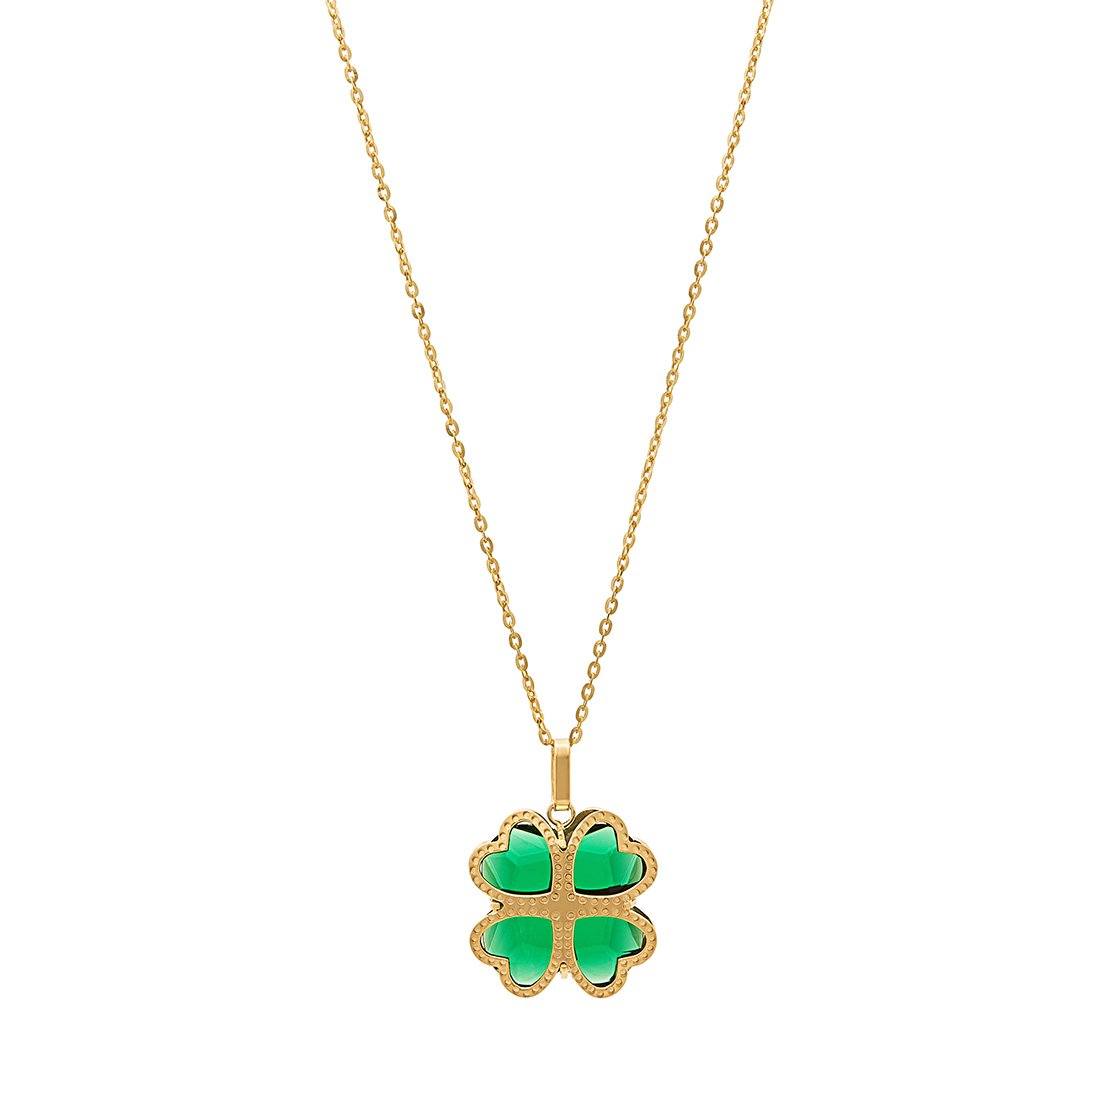 9ct Yellow Gold Silver Infused 4 Leaf Clover Pendant Necklace 45cm Necklaces Bevilles 